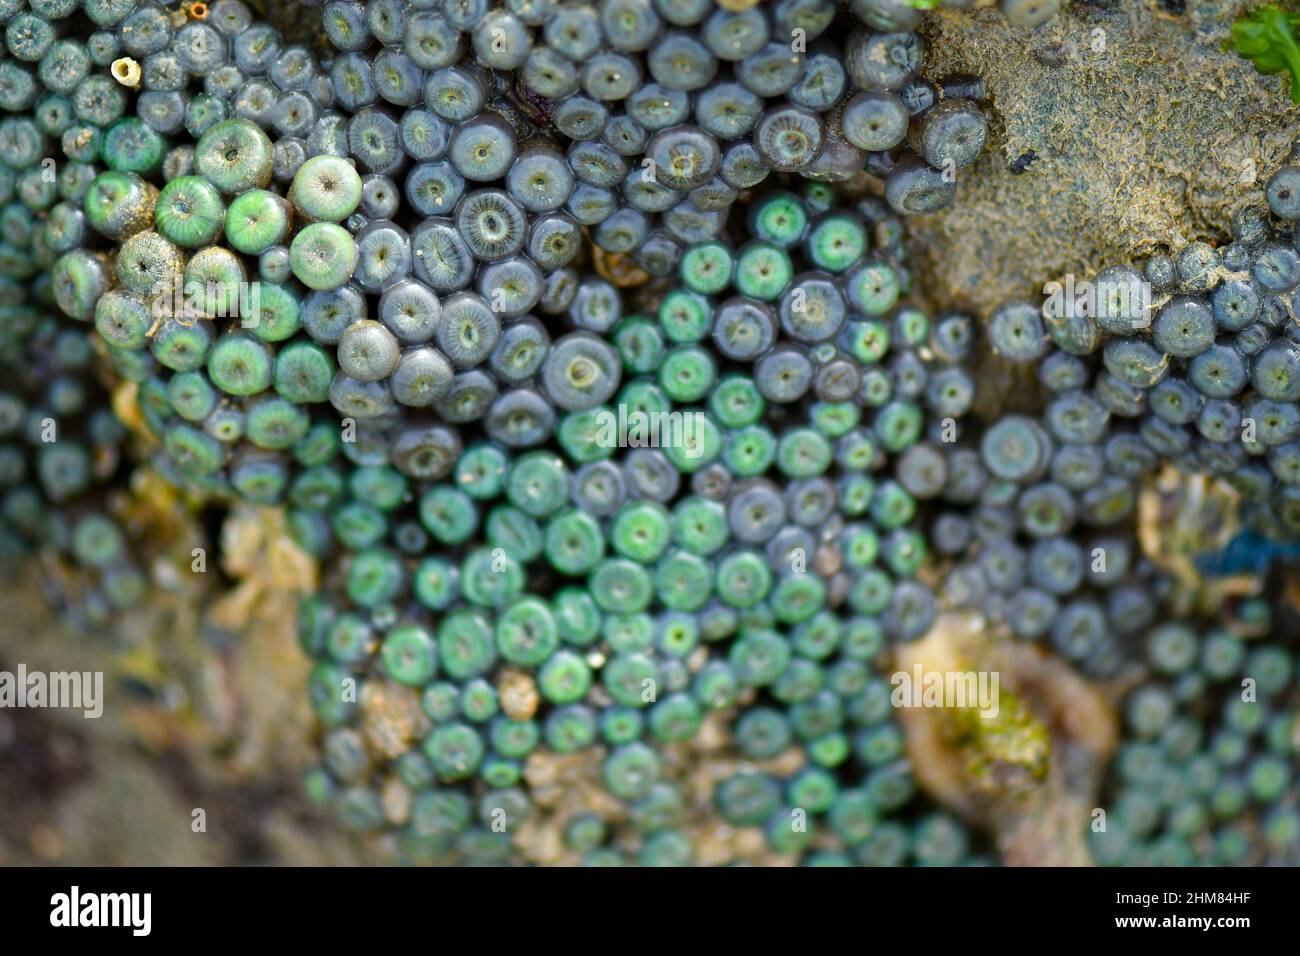 Sea creatures form patterns on seabeds. Stock Photo